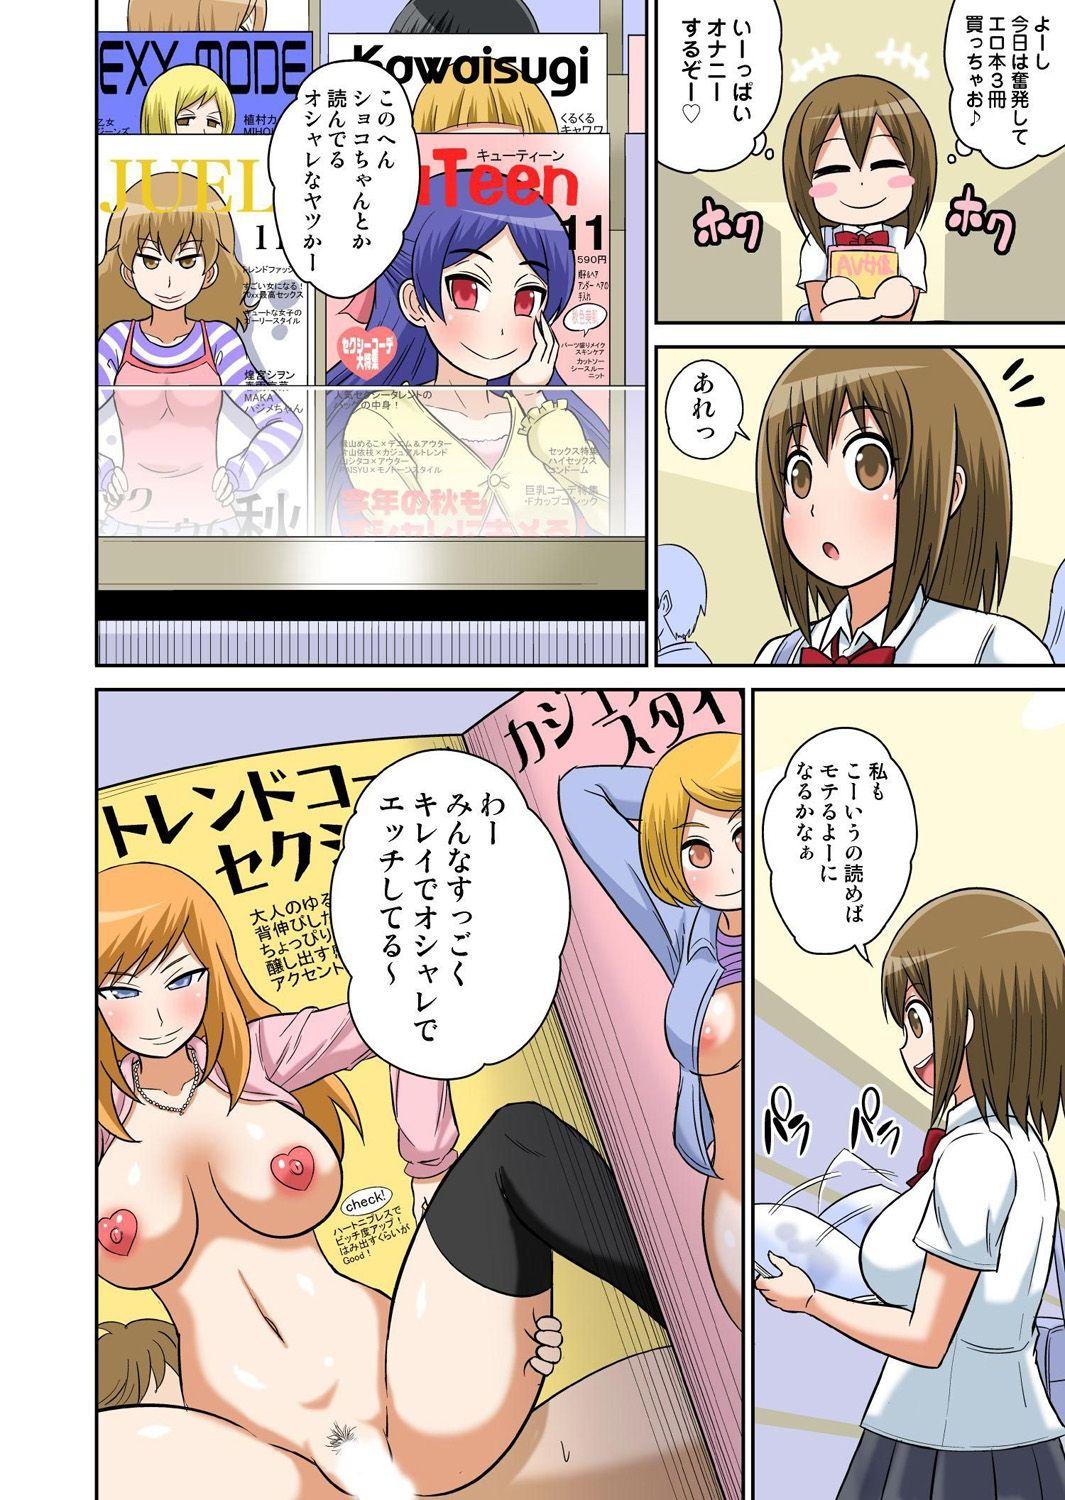 Moan Classmate to Ecchi Jugyou 7 Family Roleplay - Page 3